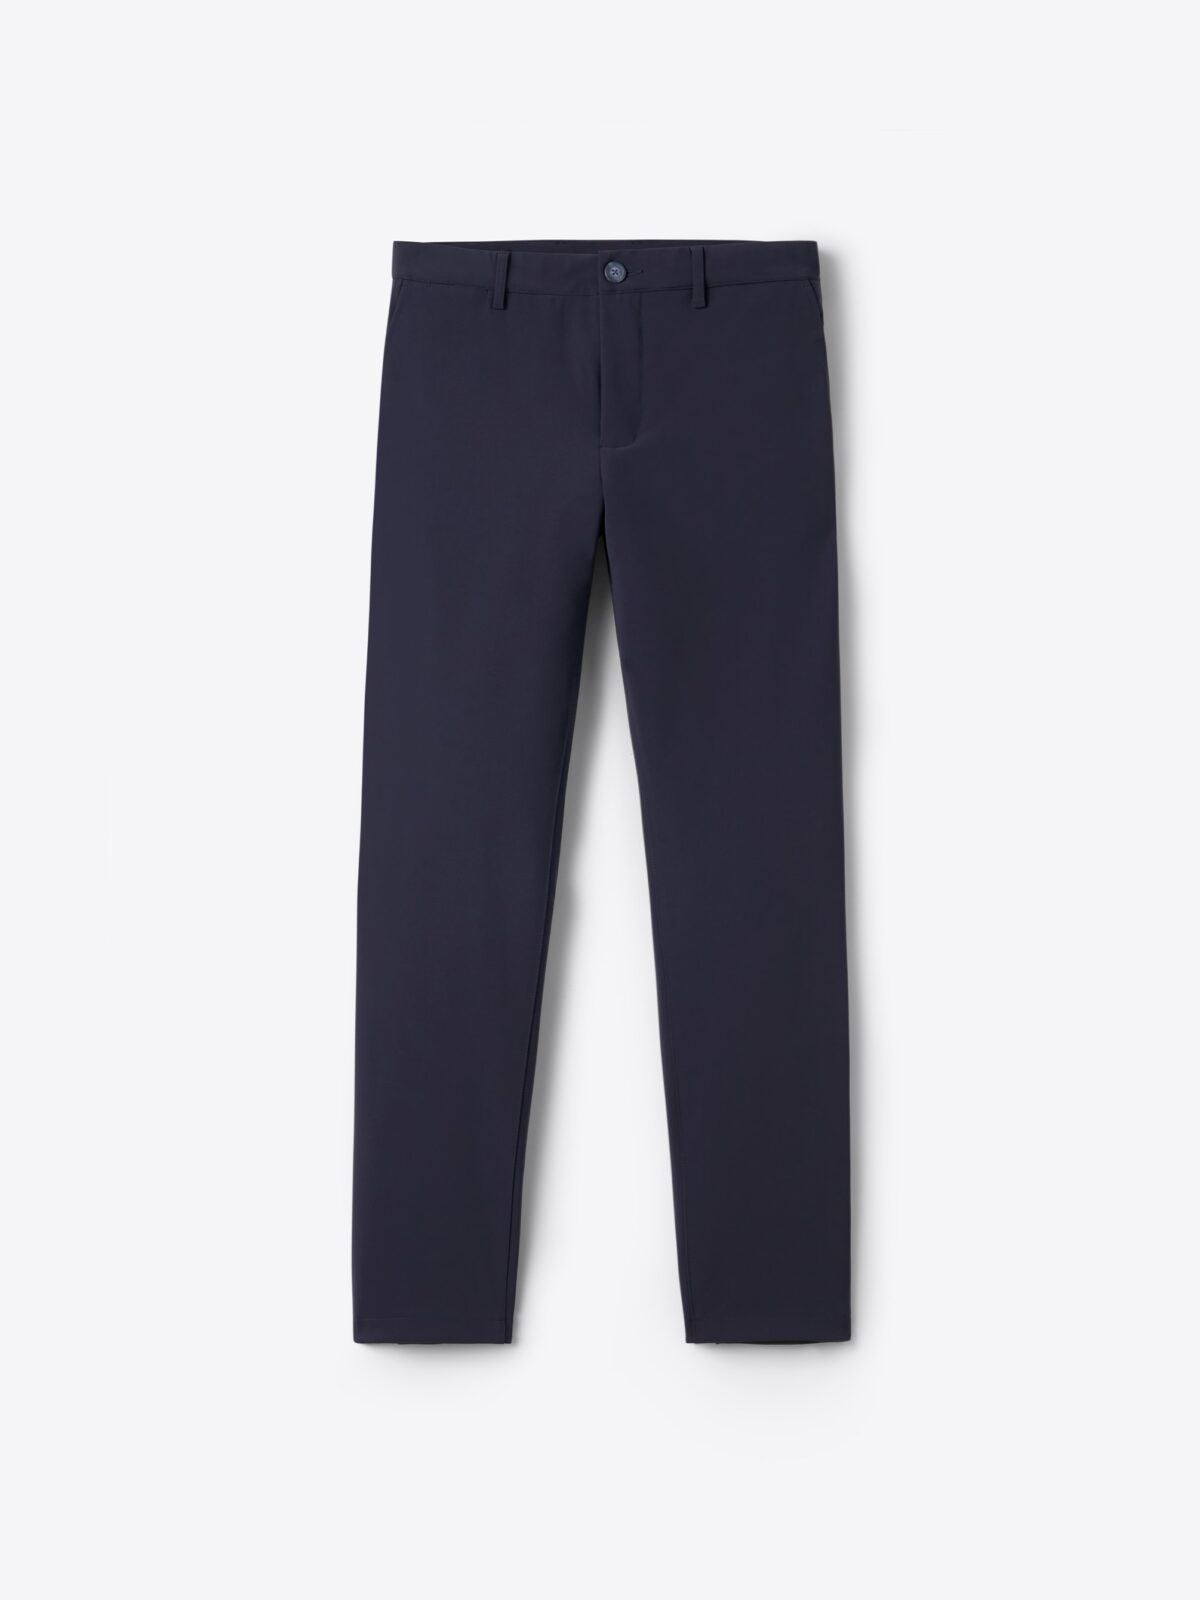 Buy Louis Philippe Navy Milano Fit Trousers - Trousers for Men 1284016 |  Myntra